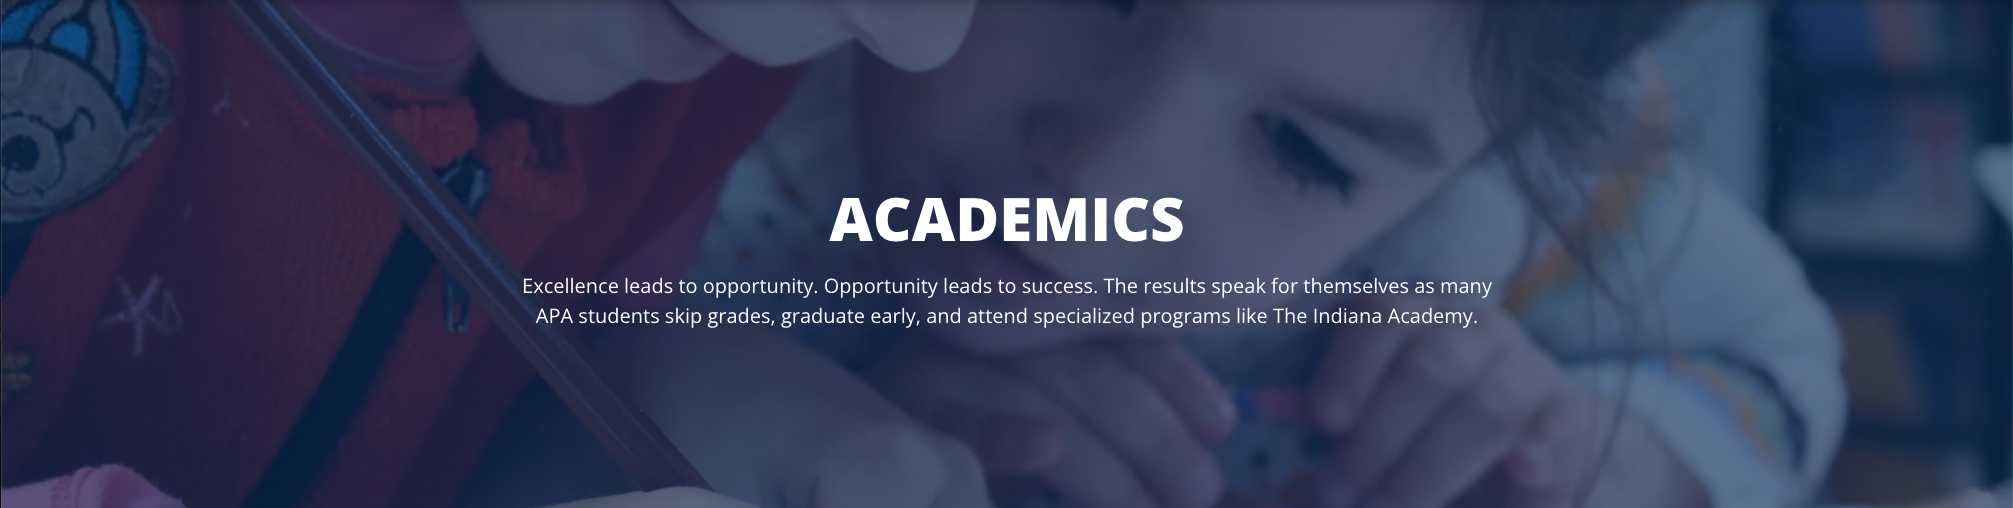 ACADEMICS Excellence leads to opportunity. Opportunity leads to success. The results speak for themselves as many APA students skip grades, graduate early, and attend specialized programs like The Indiana Academy.